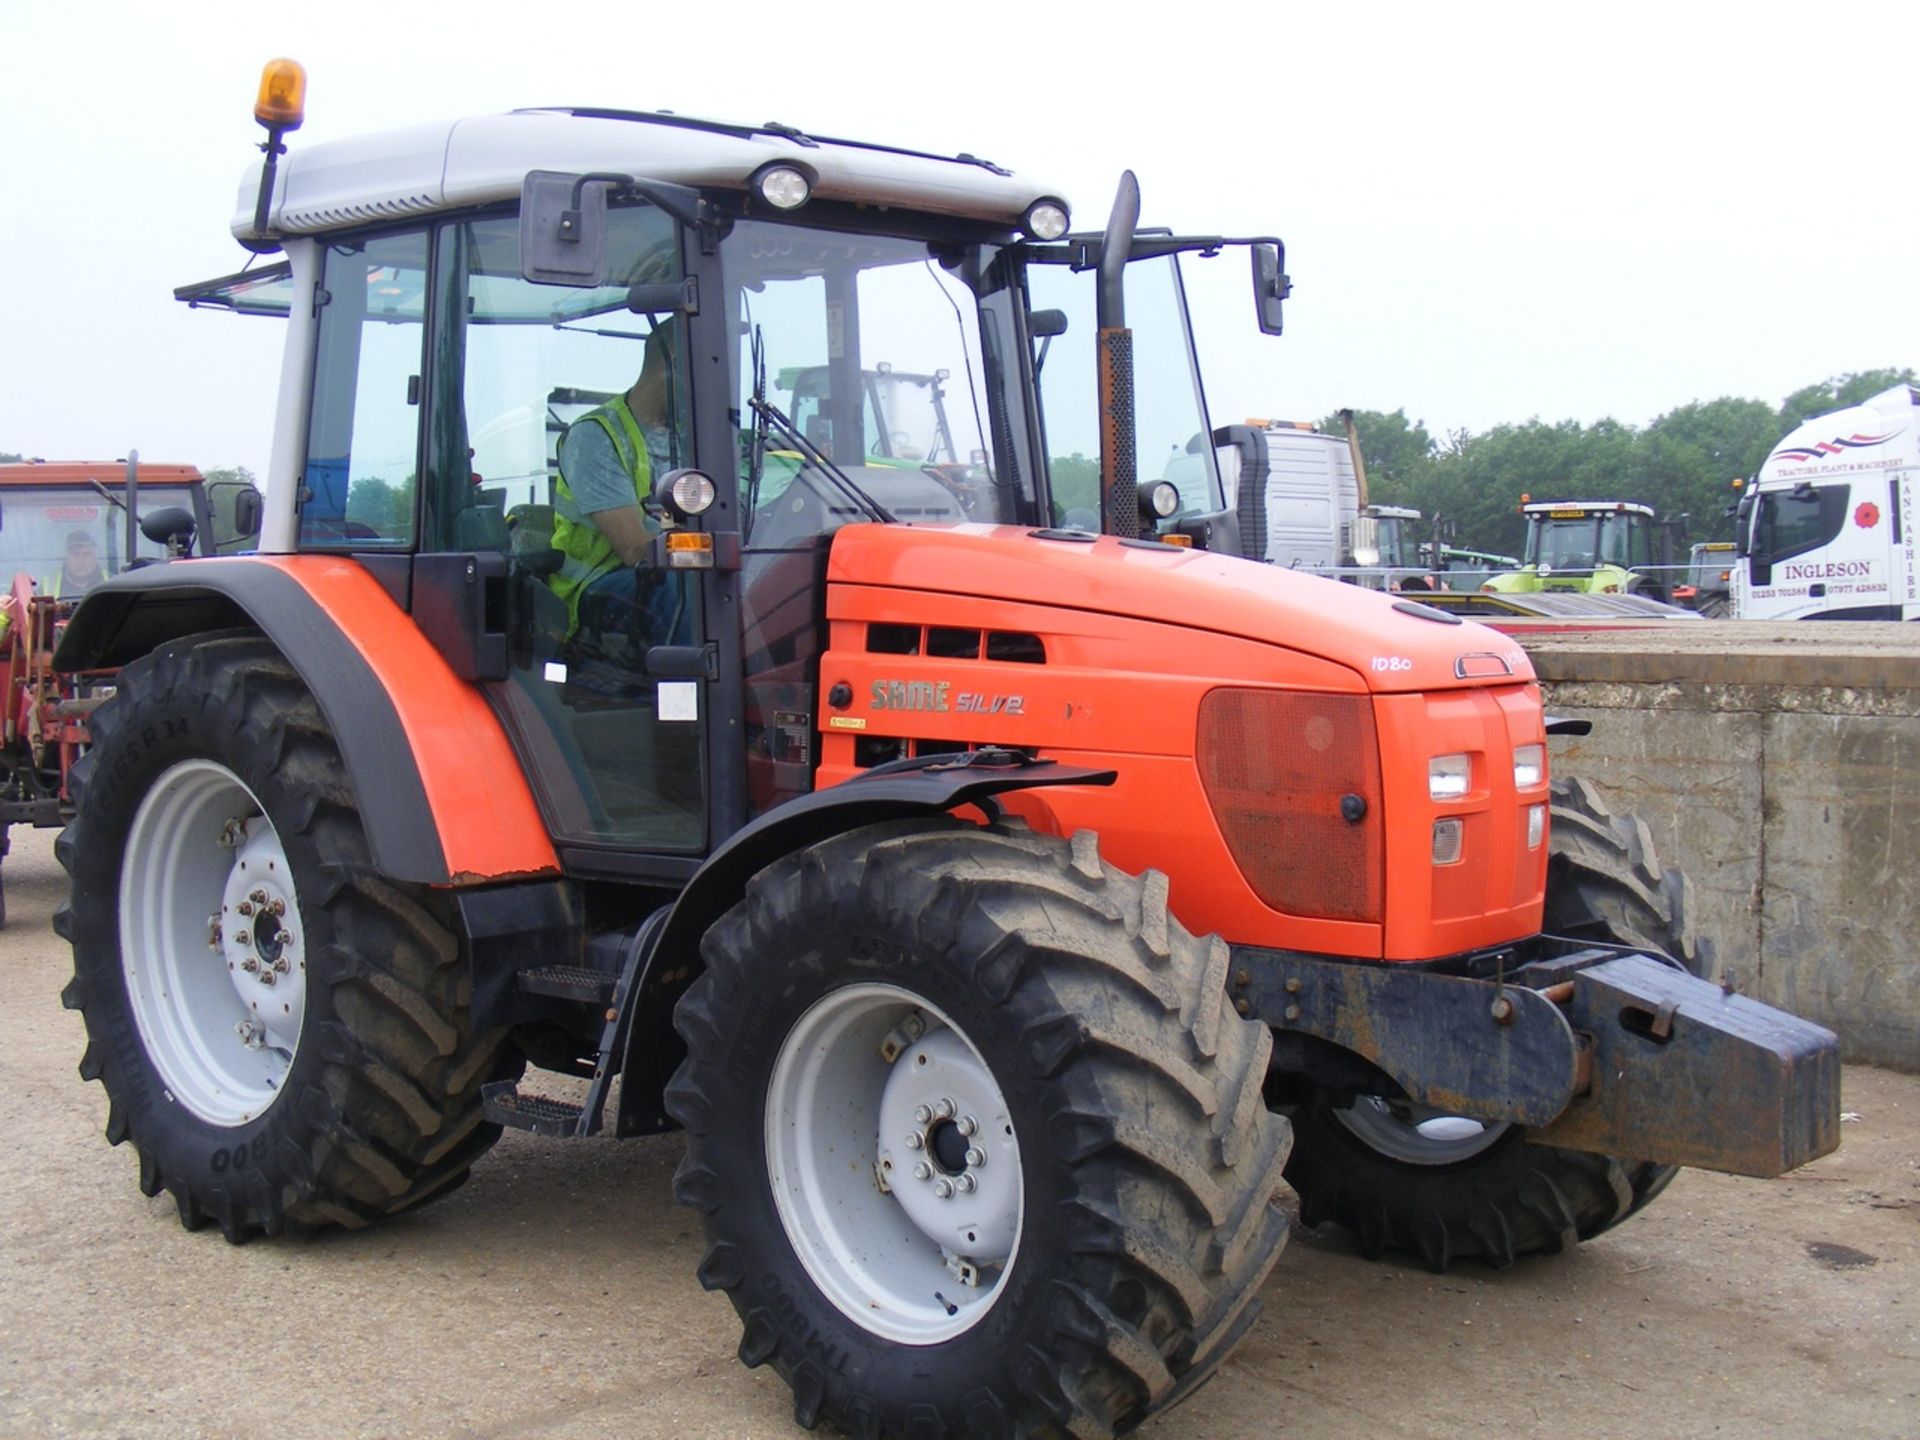 2007 Same Silver 110 Power Shuttle Tractor with Full Set of Weights & Oversized Tyres. V5 will be - Image 3 of 5